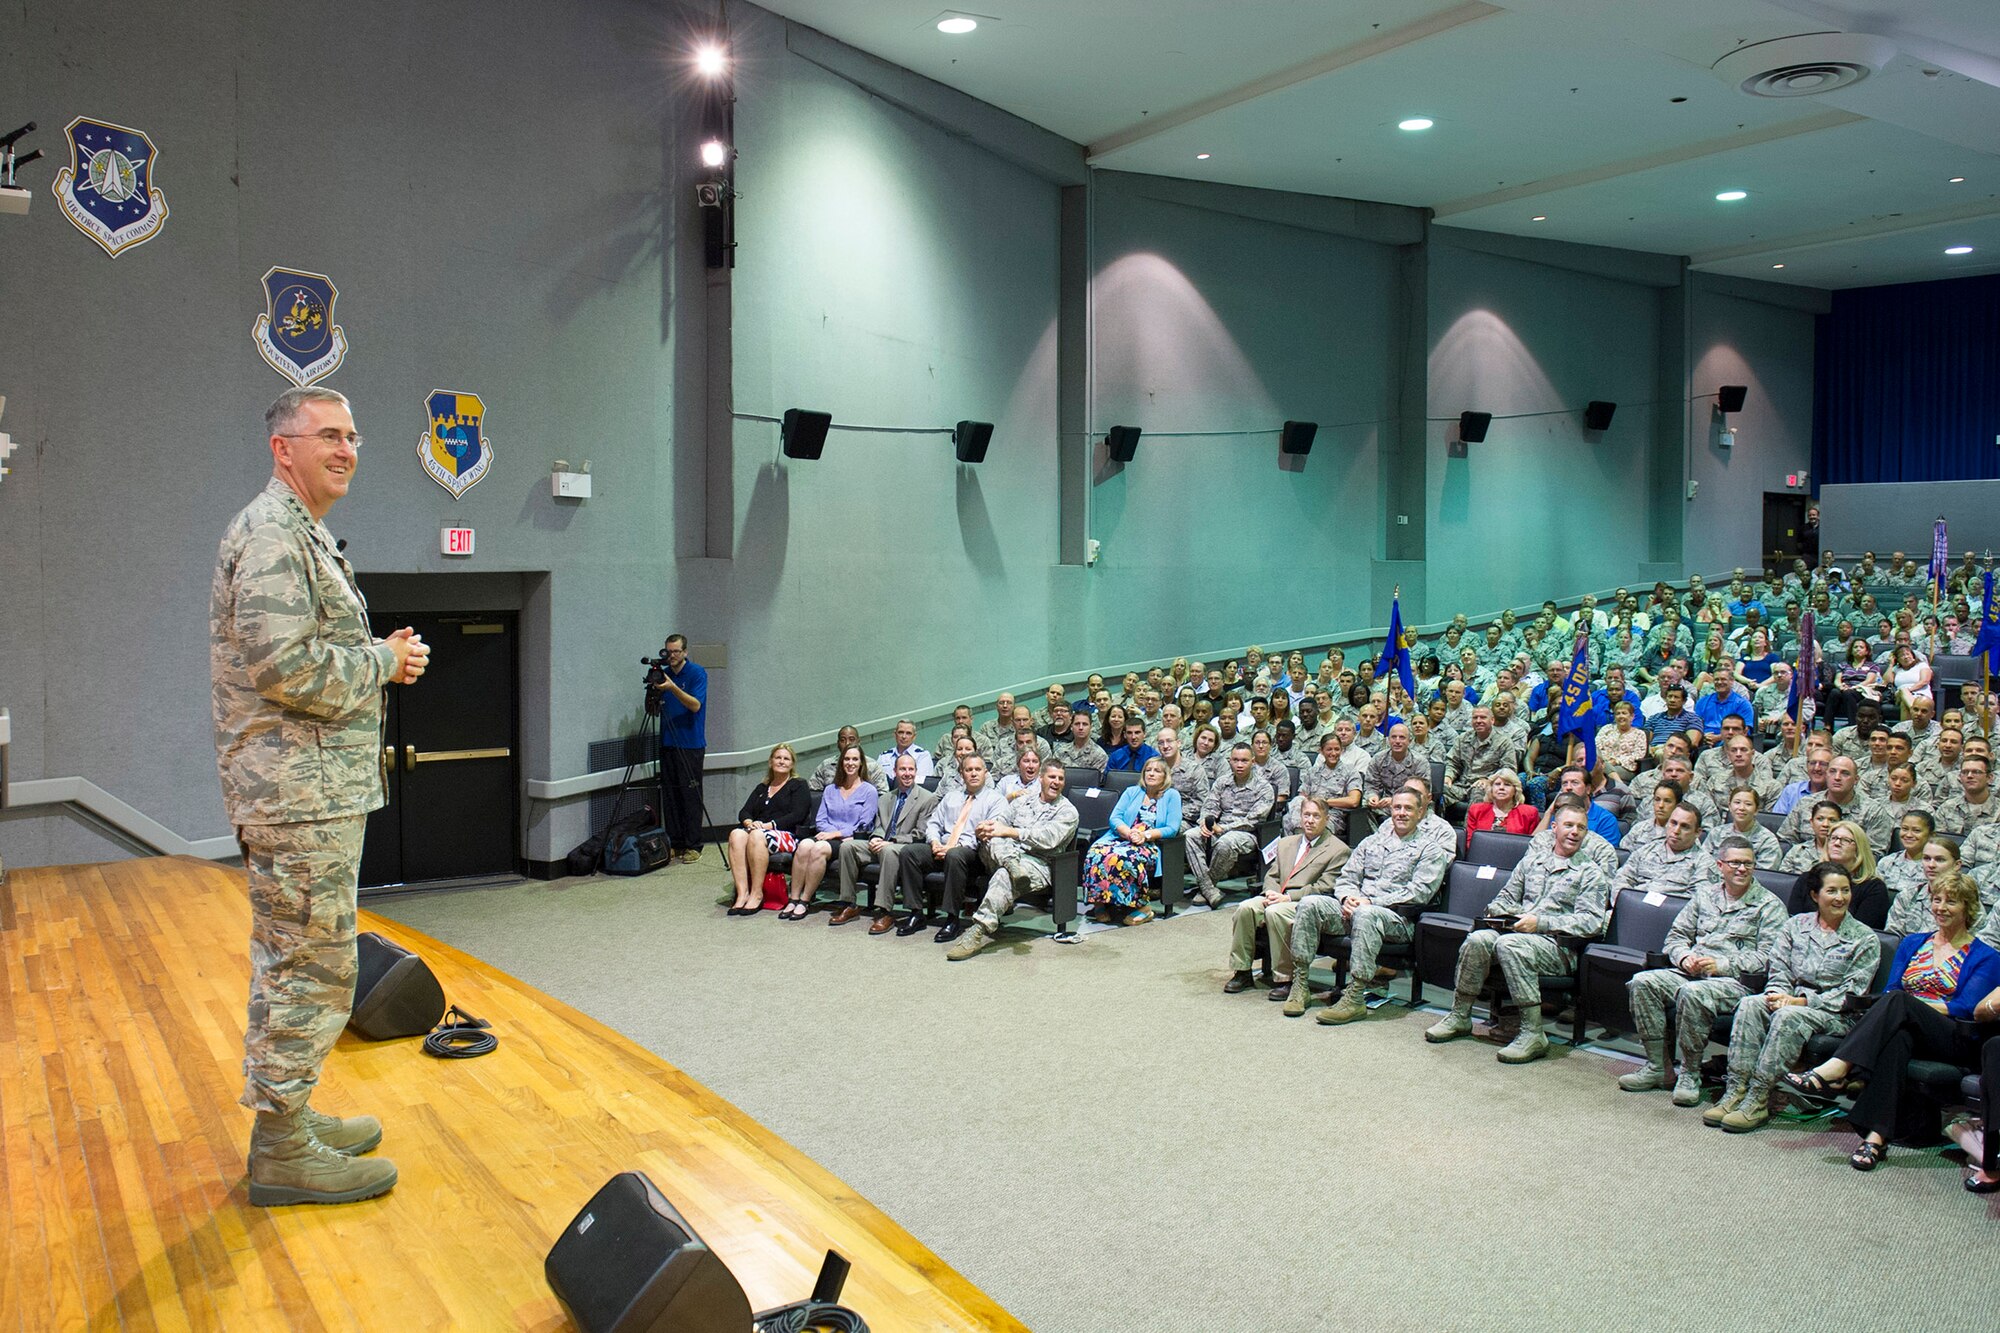 Gen. John Hyten, commander, Air Force Space Command, speaks to the members of Patrick Air Force Base and Cape Canaveral Air Force Station July 14, 2015, at the Base Theater. During his comments, Hyten emphasized his three priorities – win today’s fight, prepare for tomorrow’s fight and take care of Airmen. (U.S. Air Force photo/Matthew Jurgens) (Released)